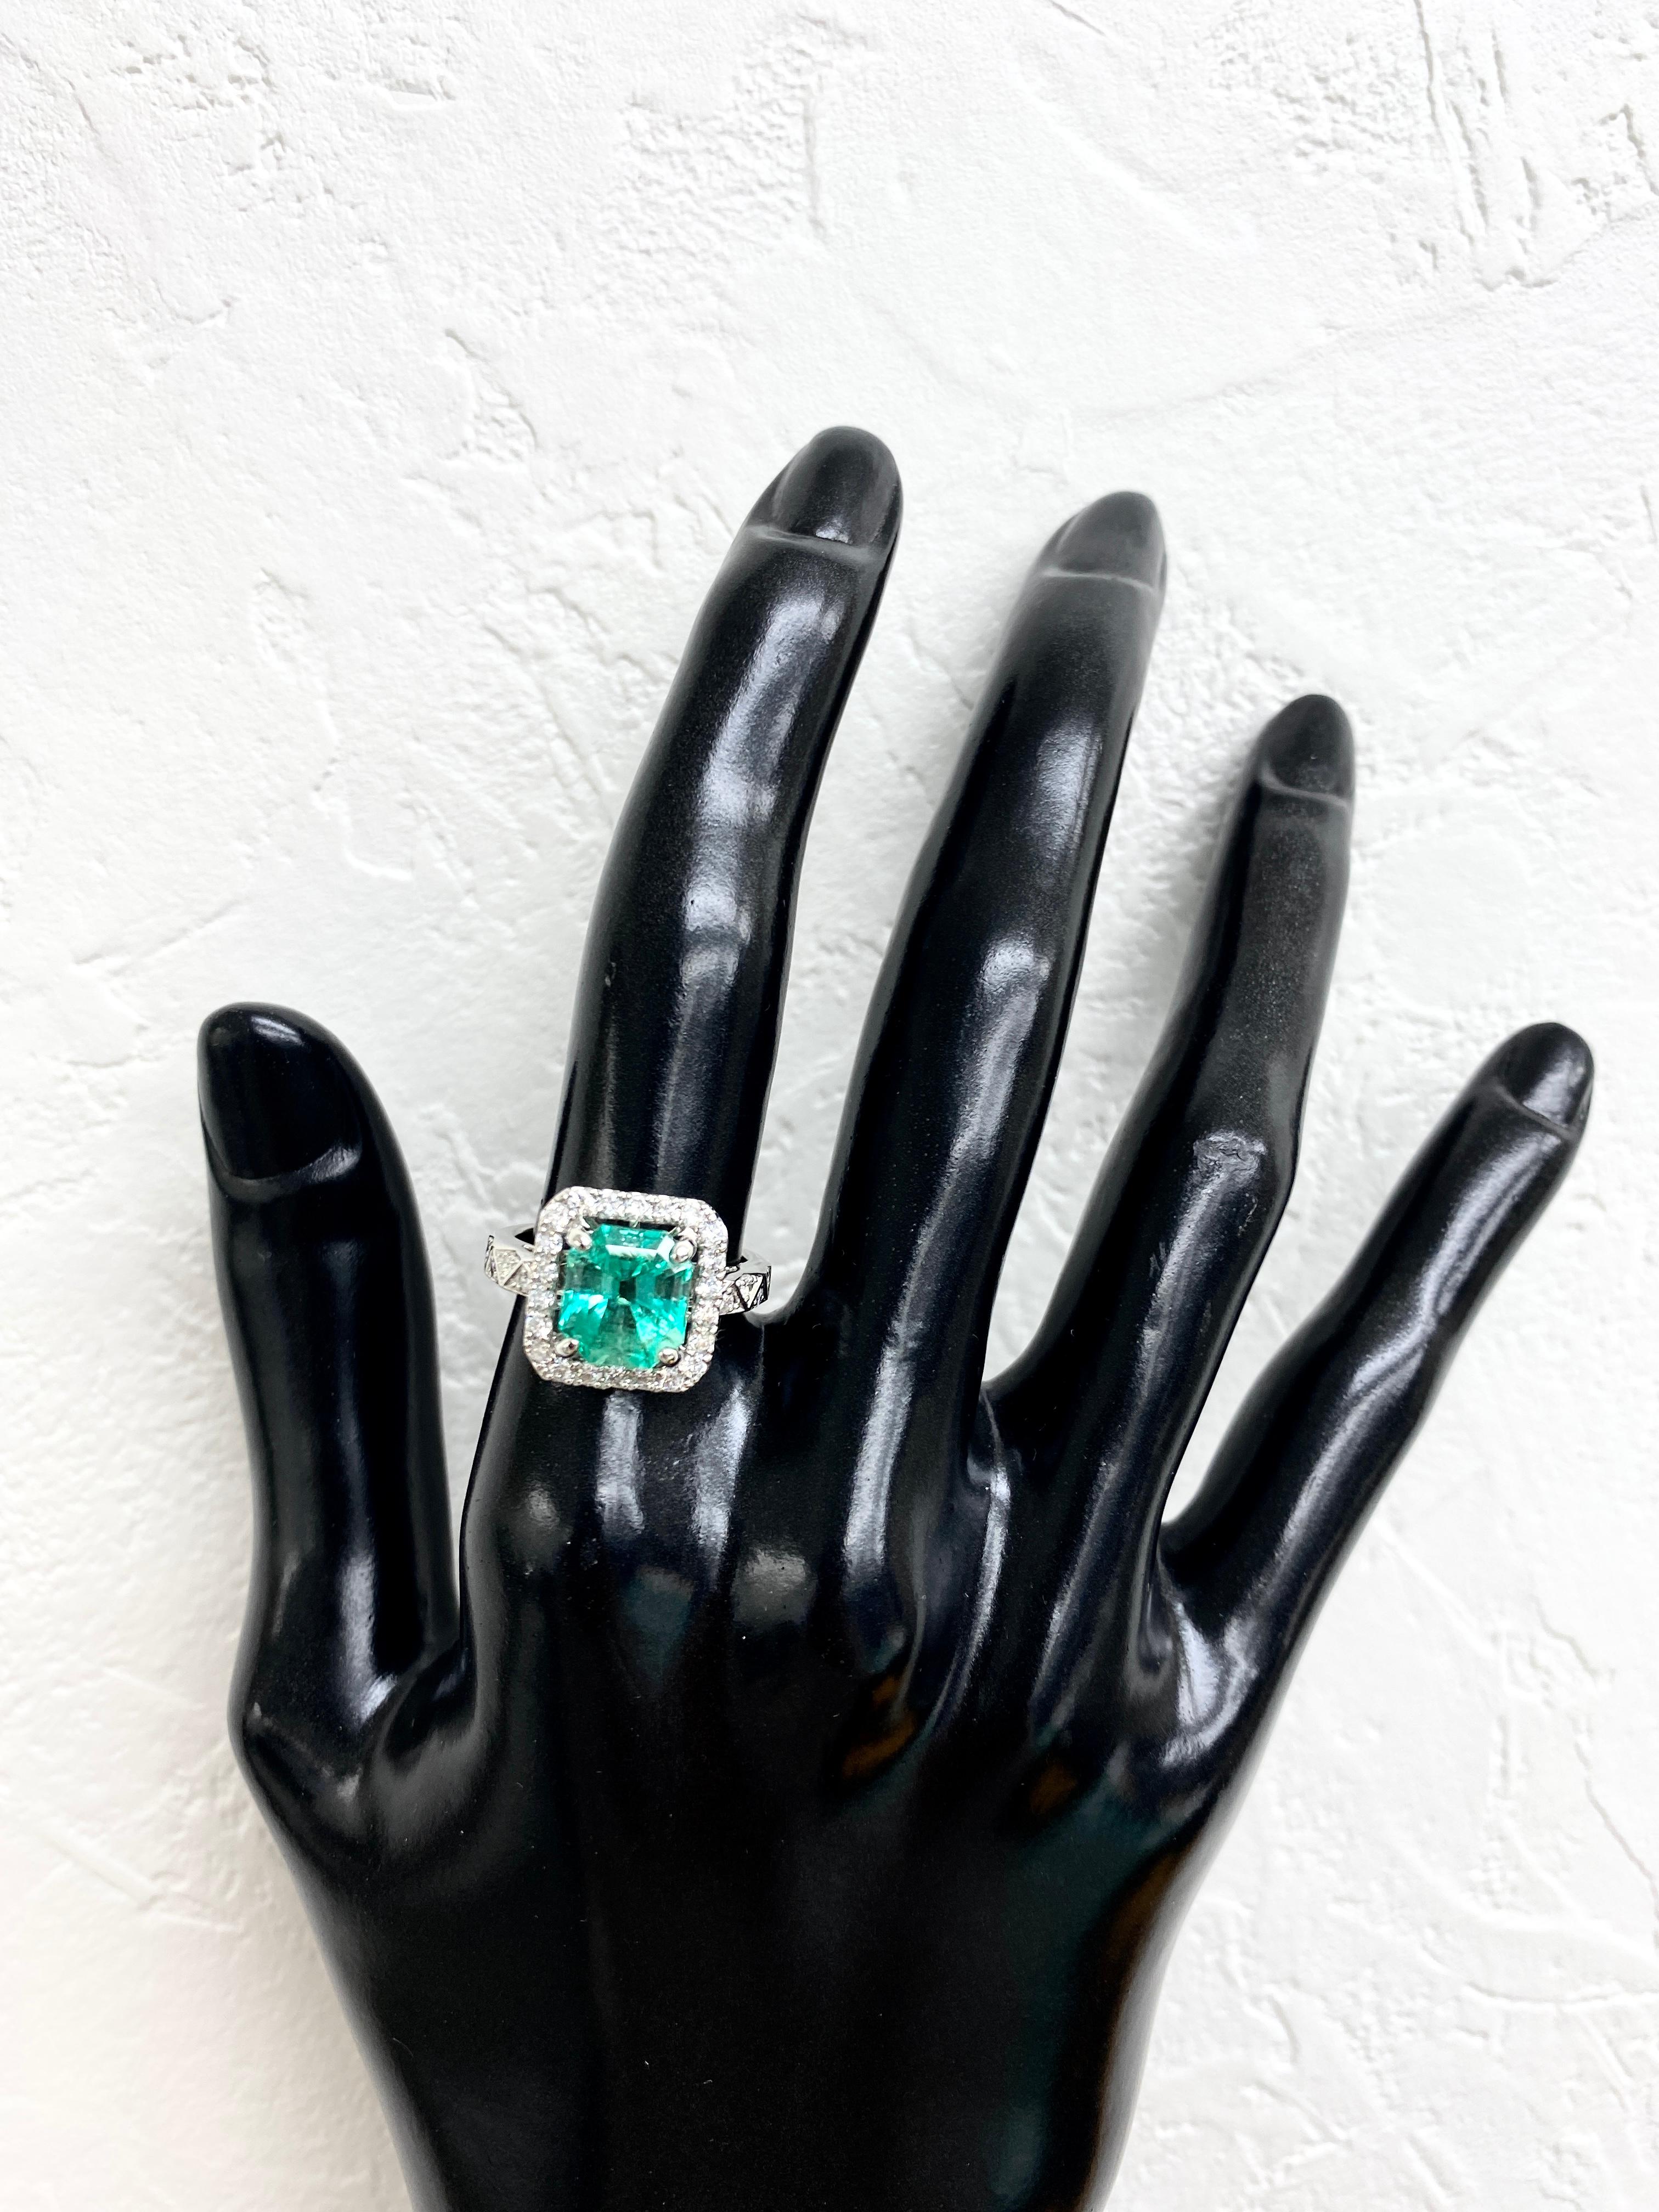 Women's 2.48 Carat, Natural, Colombian Emerald and Diamond Ring Set in Platinum